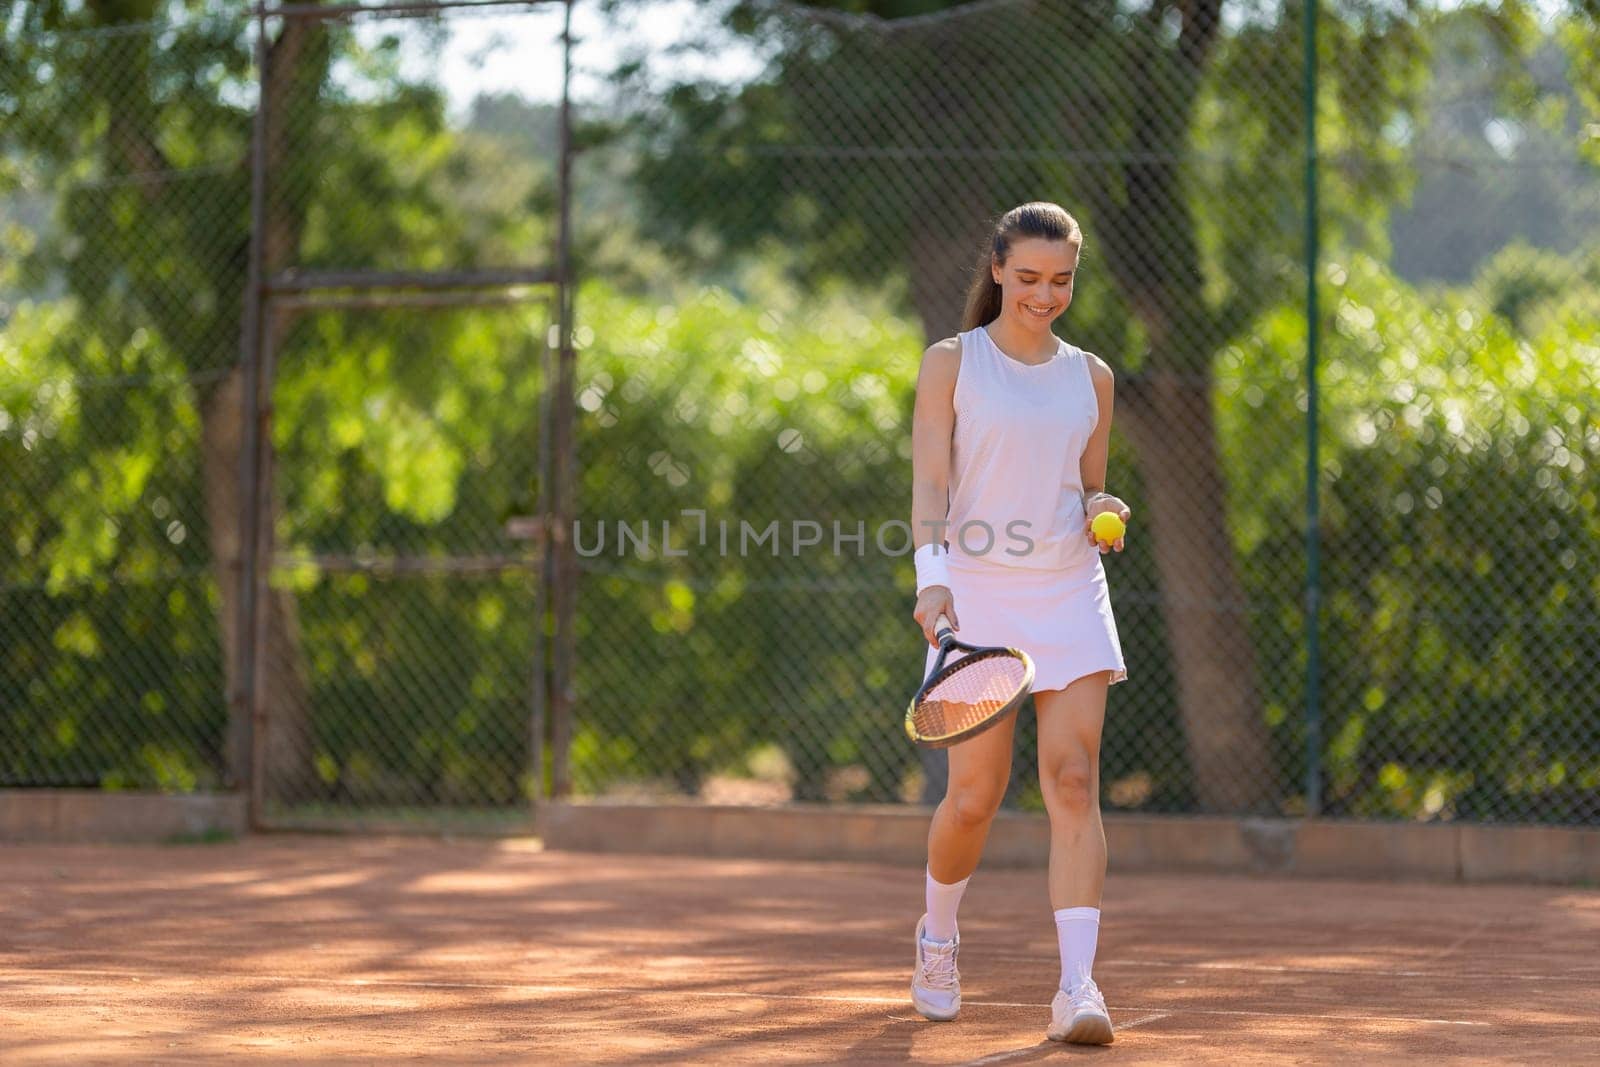 A woman is walking on a tennis court holding a tennis racket and a tennis ball. She is smiling and seems to be enjoying her time